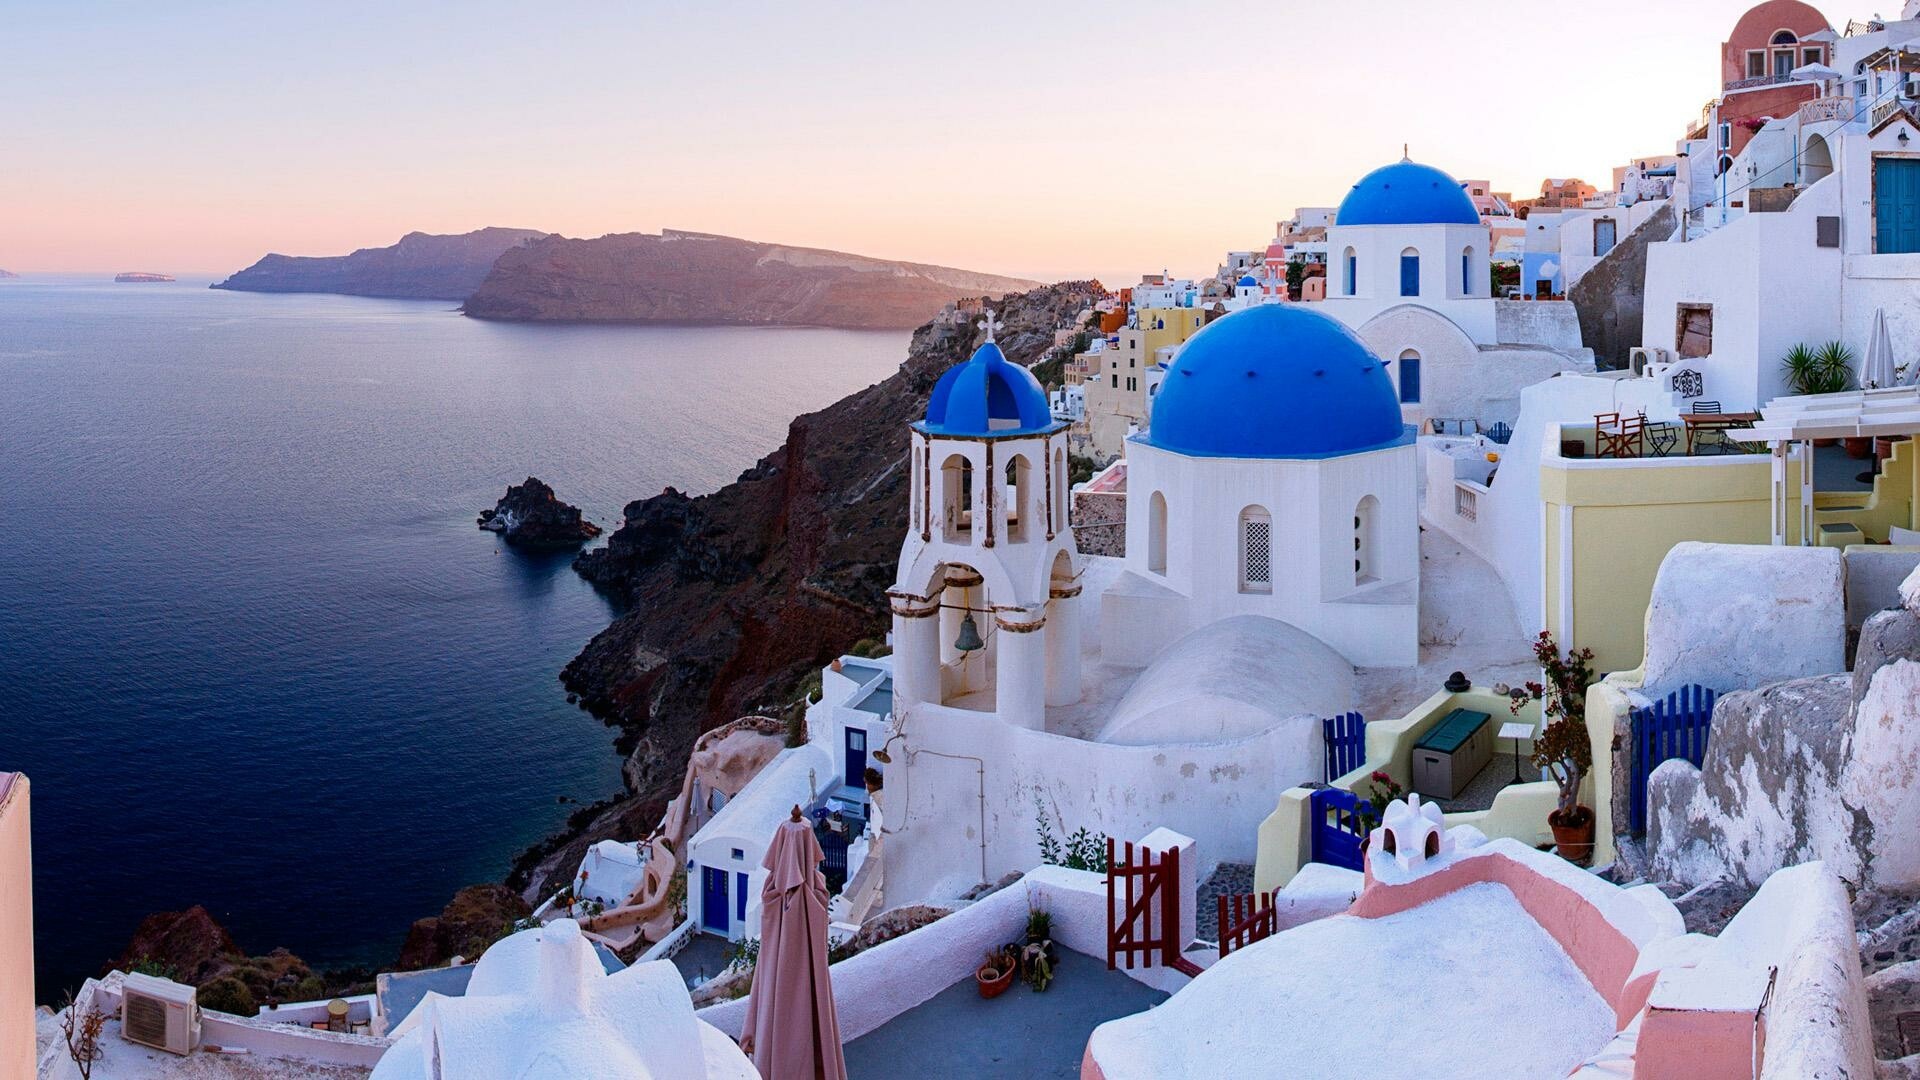 Blue Domes of Oia, Santorini travels, Greece wallpapers, PC and mobile, 1920x1080 Full HD Desktop